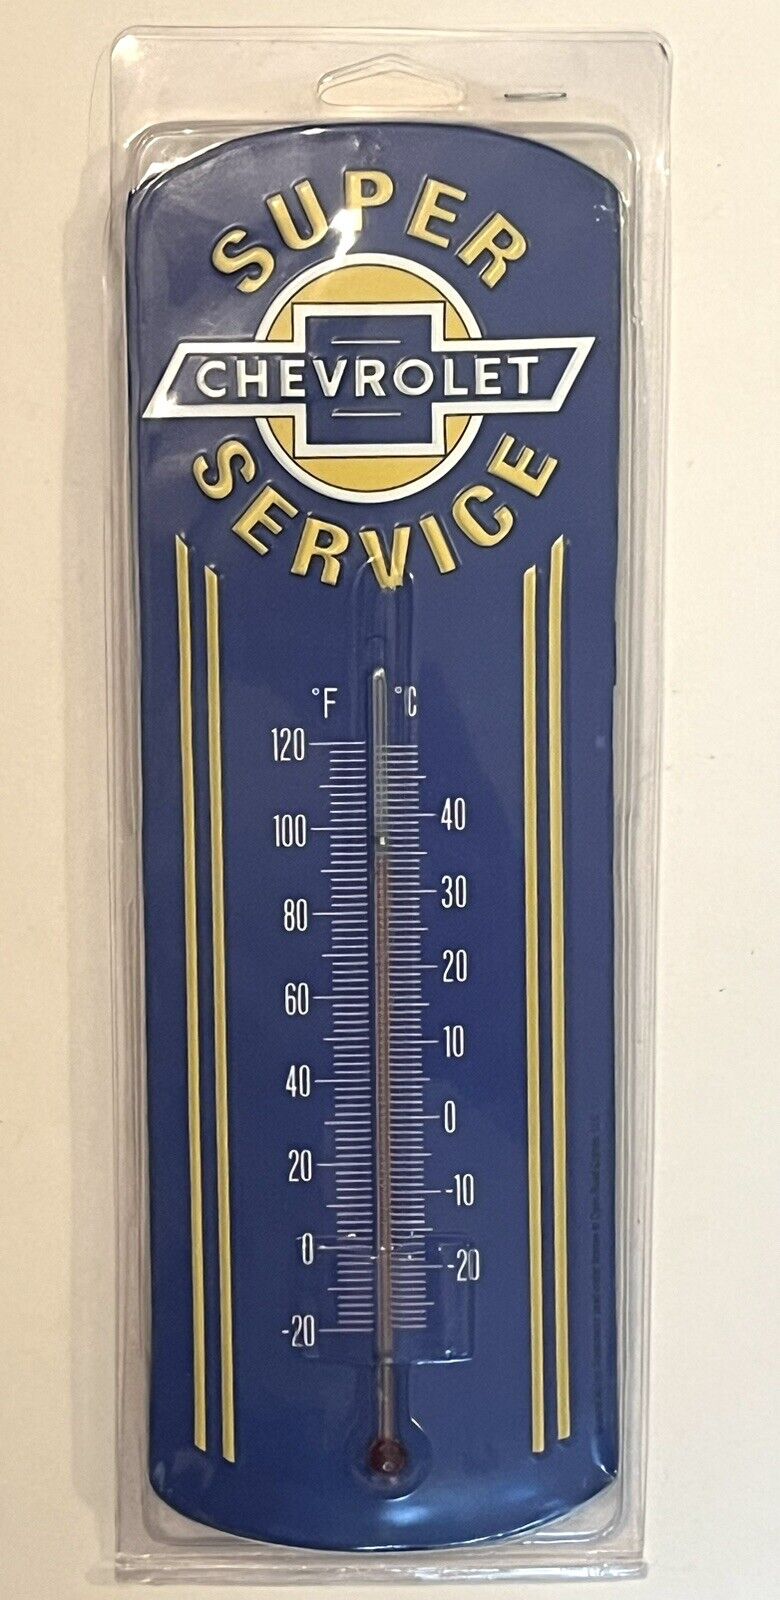 NEW Chevrolet Super Service Open Road Brand Metal Thermometer Reproduction Blue